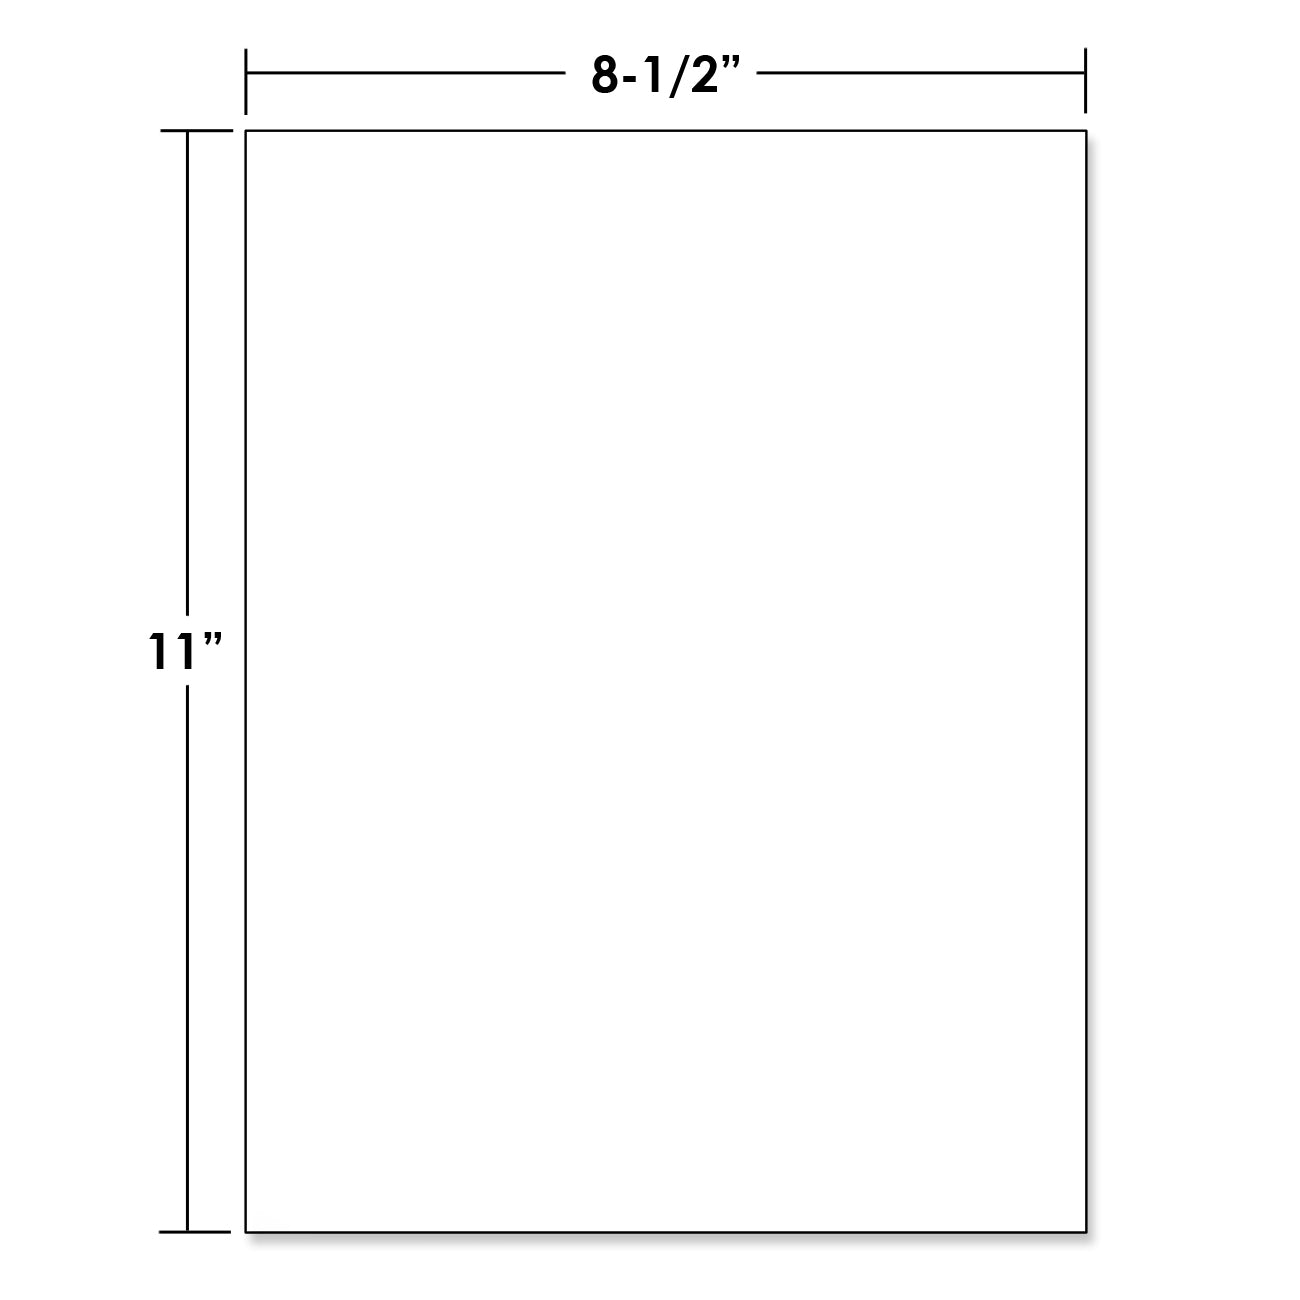 Full Sheet Printable Labels, 8.5 x 11 inch, 25/Pack, White